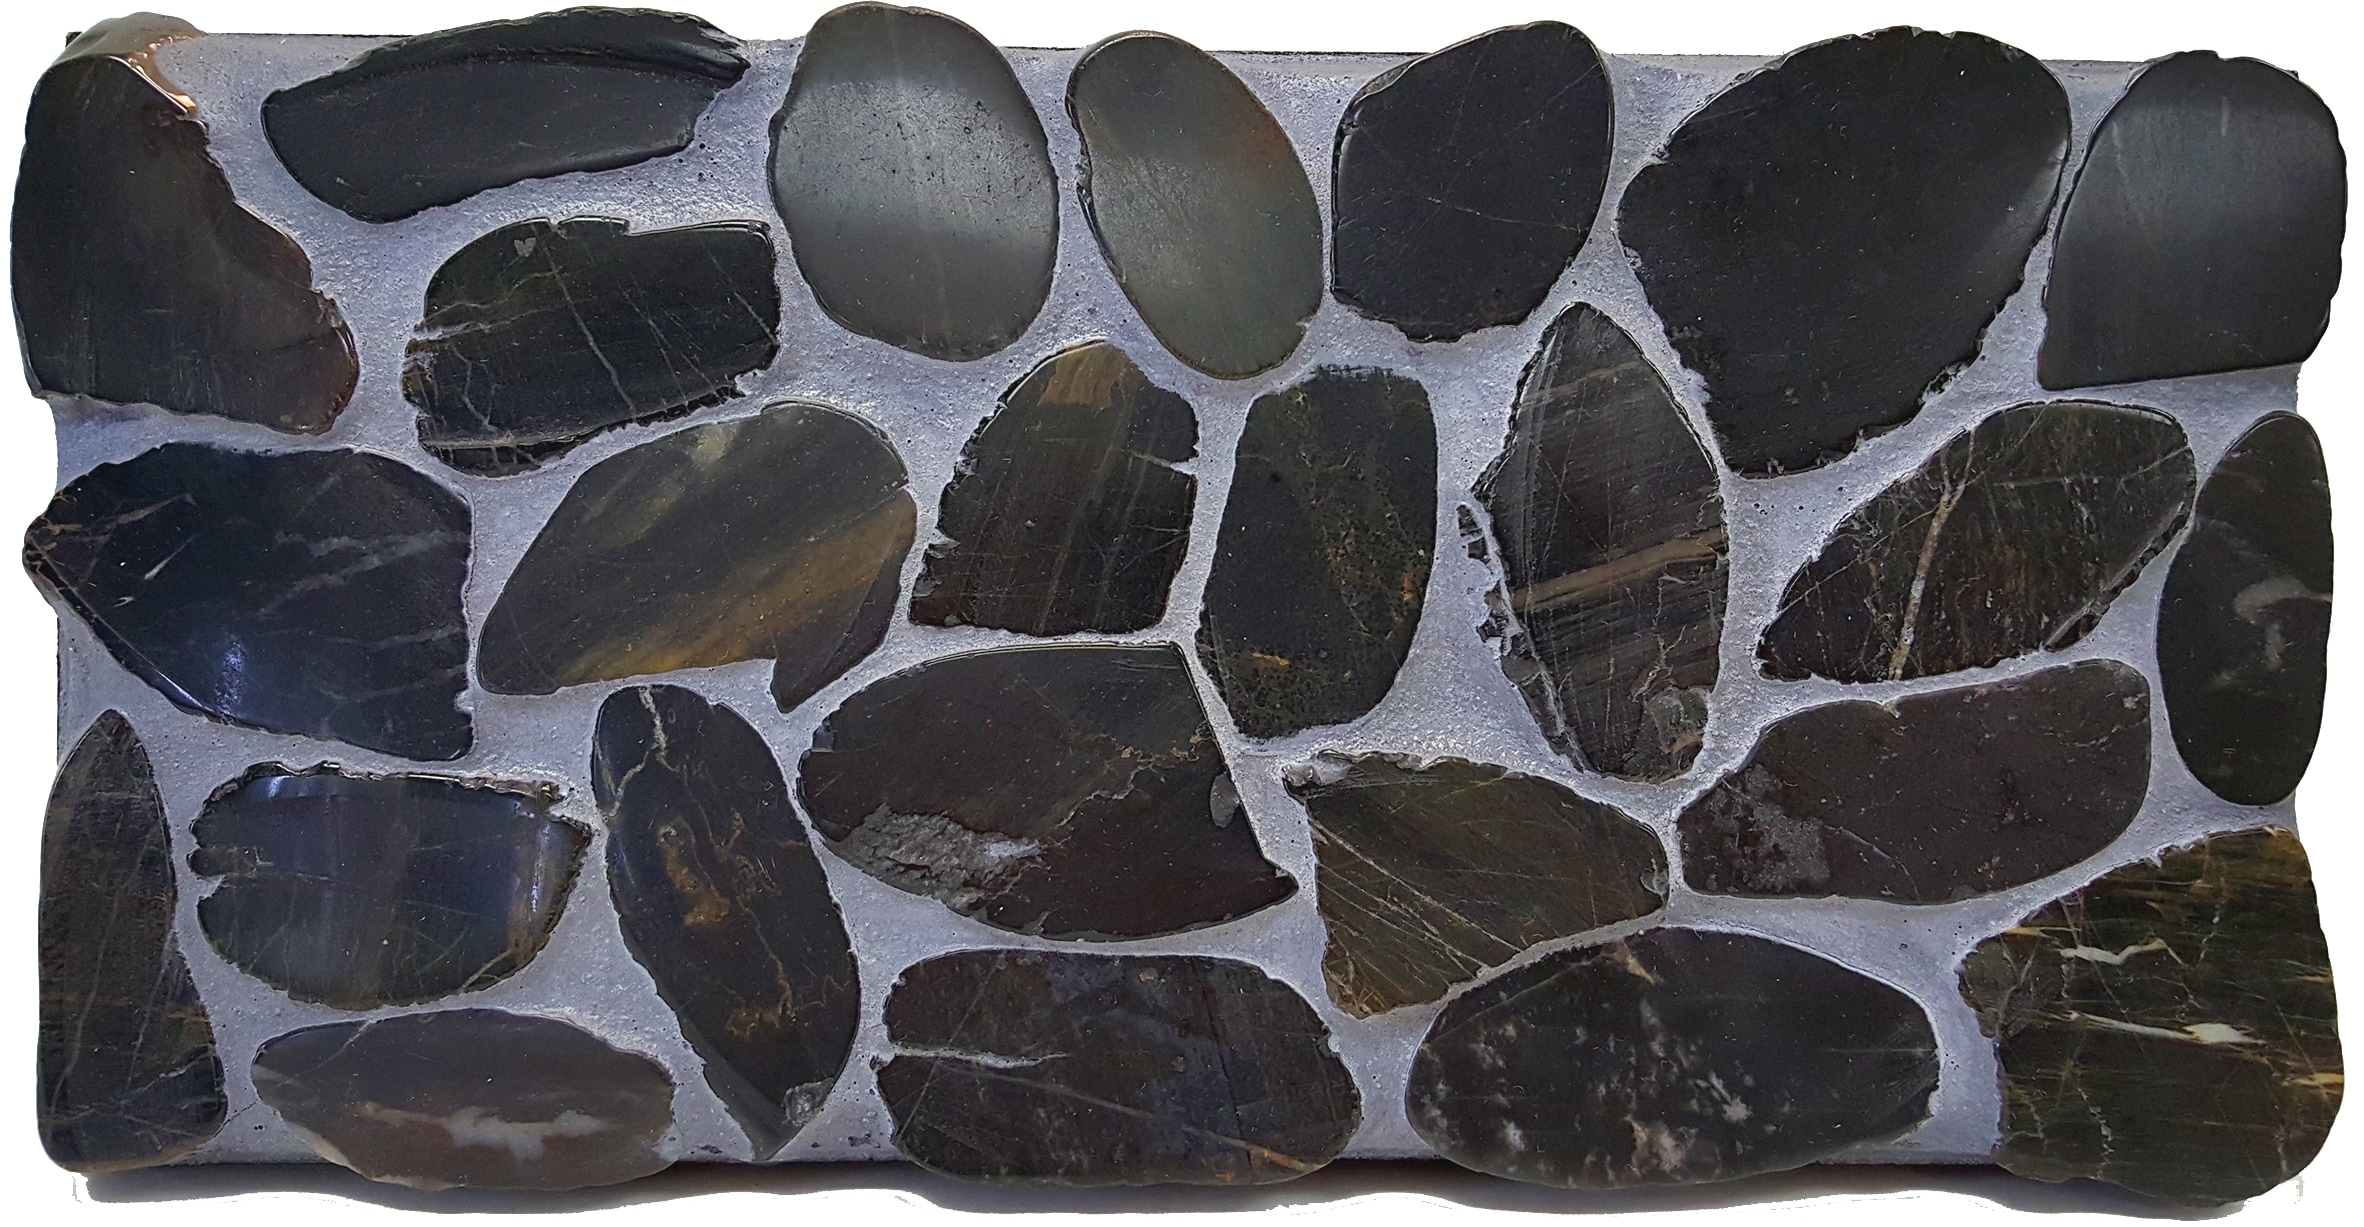 Solistone Koja Pebbles 10 Pack Viper 12 In X 12 In Polished Natural